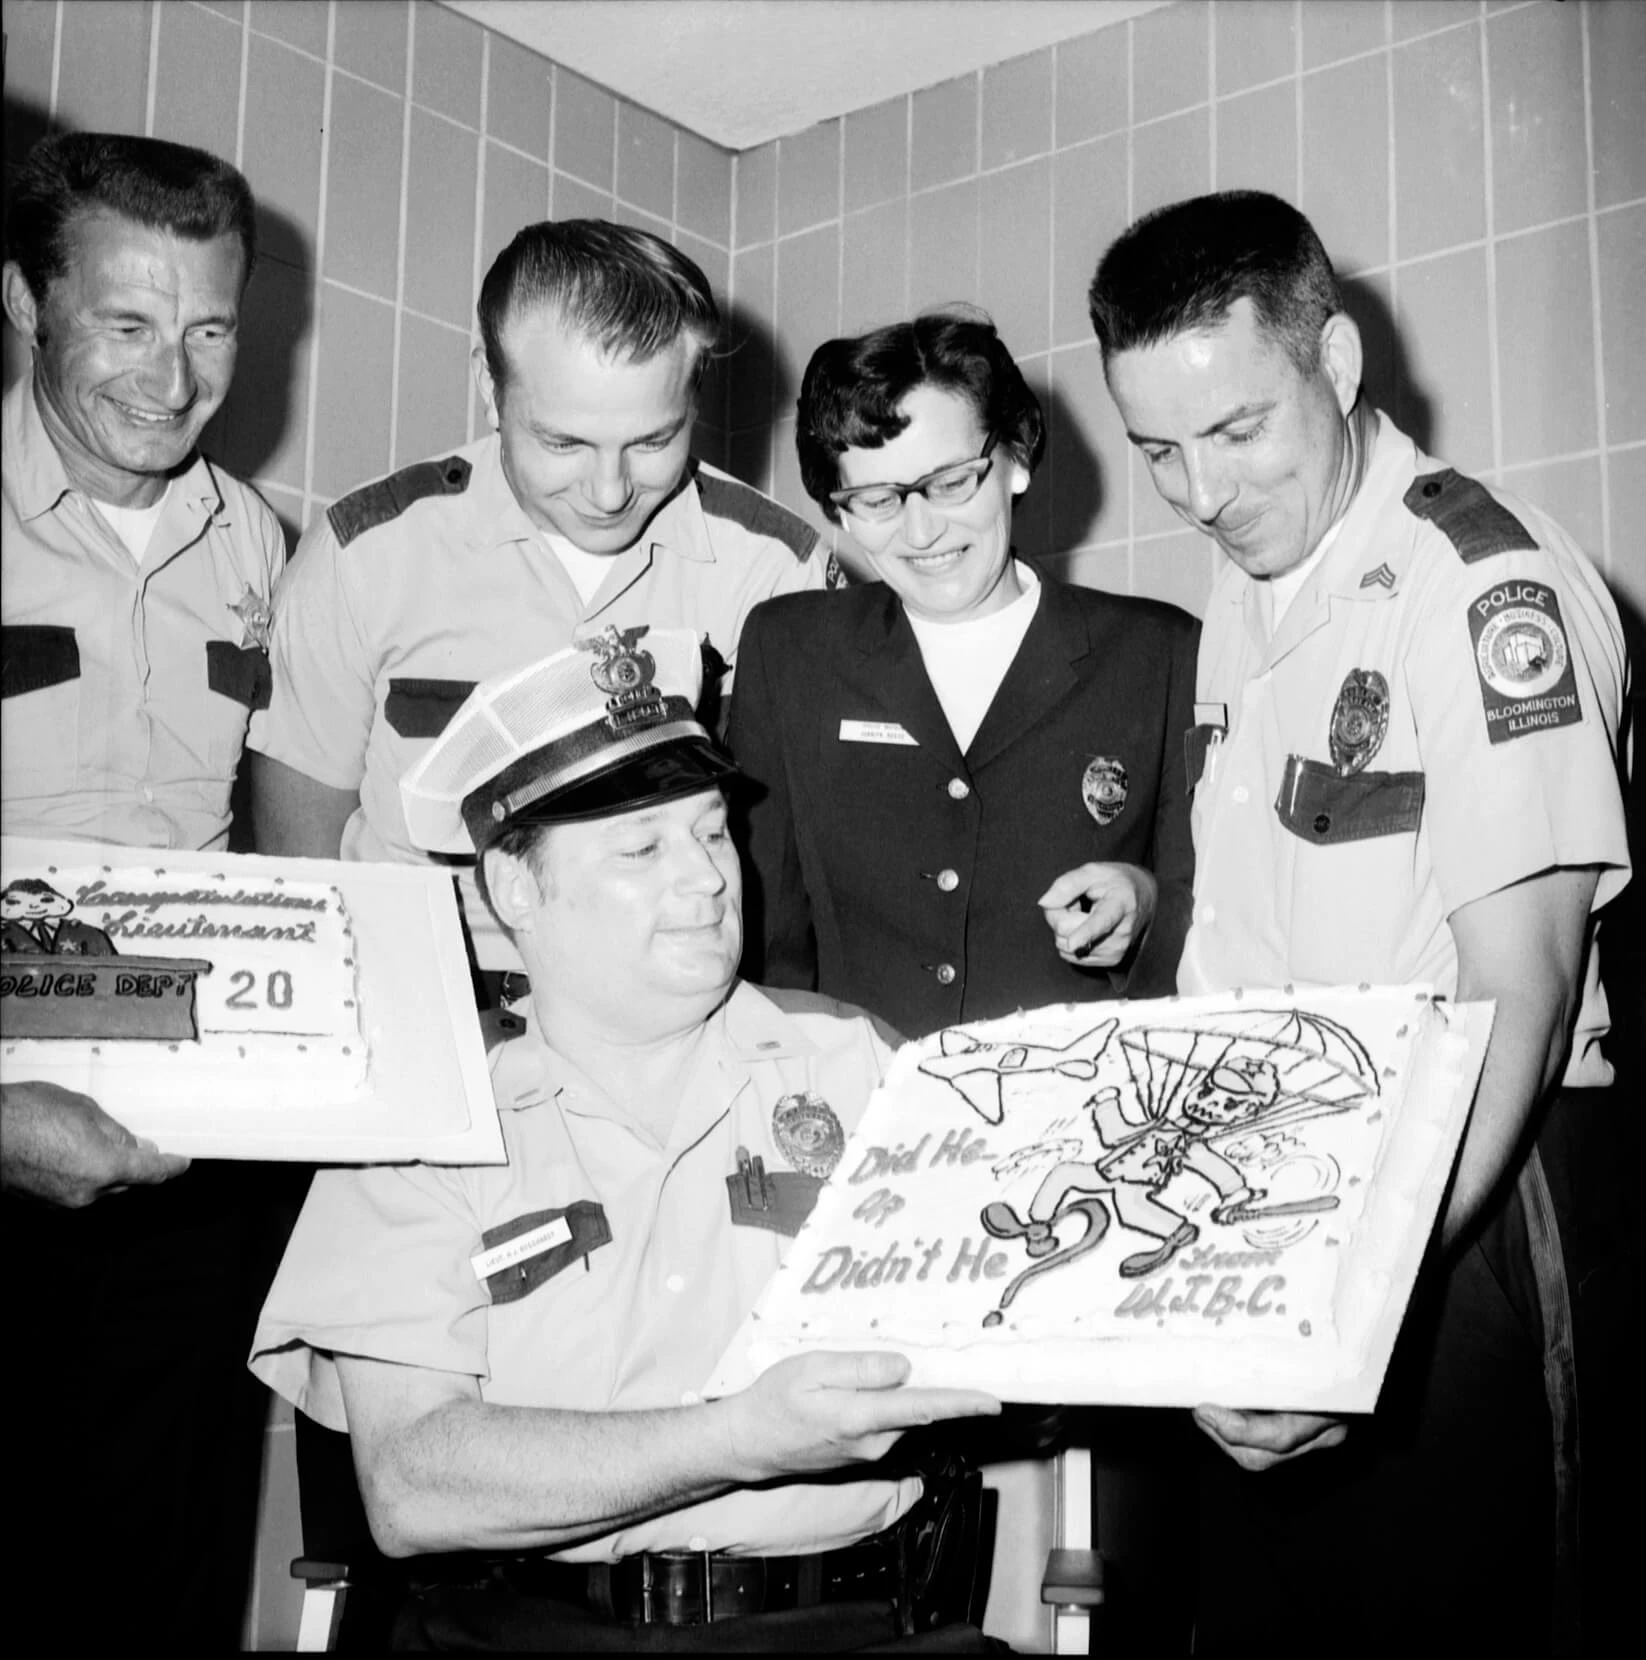 Four men in light-colored police uniforms pose with a woman in a dark police coat. They are holding two sheet cakes celebrating Reece's retirement. One cake shows a man on a parachute with a baton.